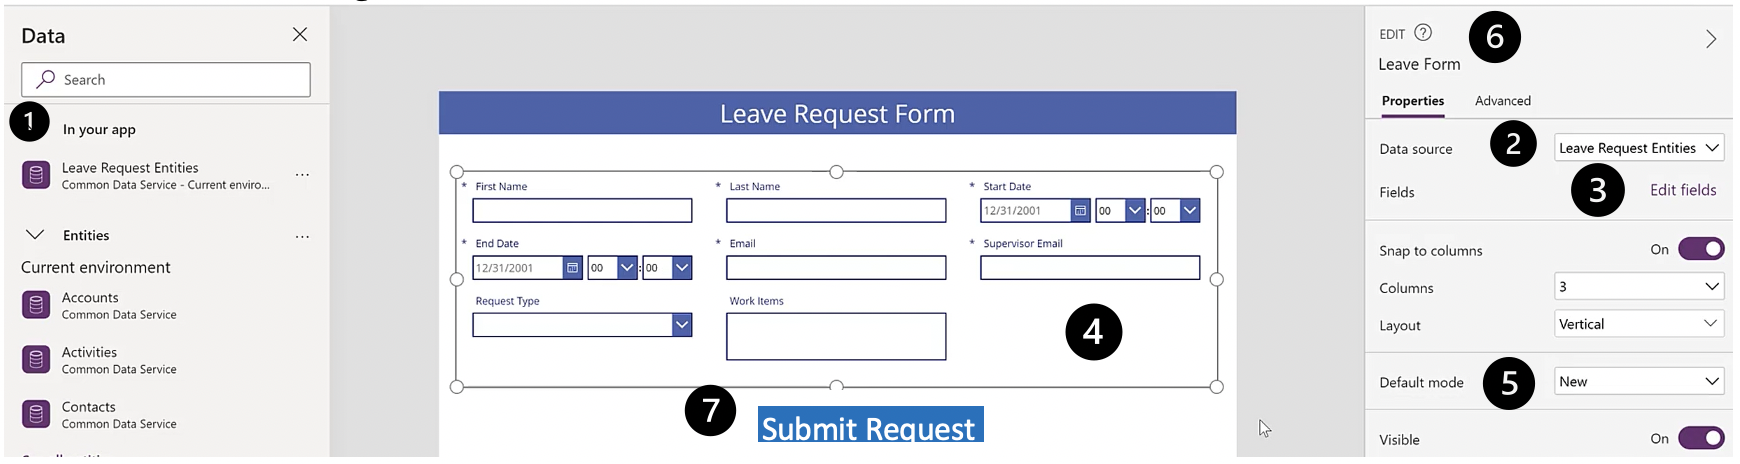 Change Name to Leave Form